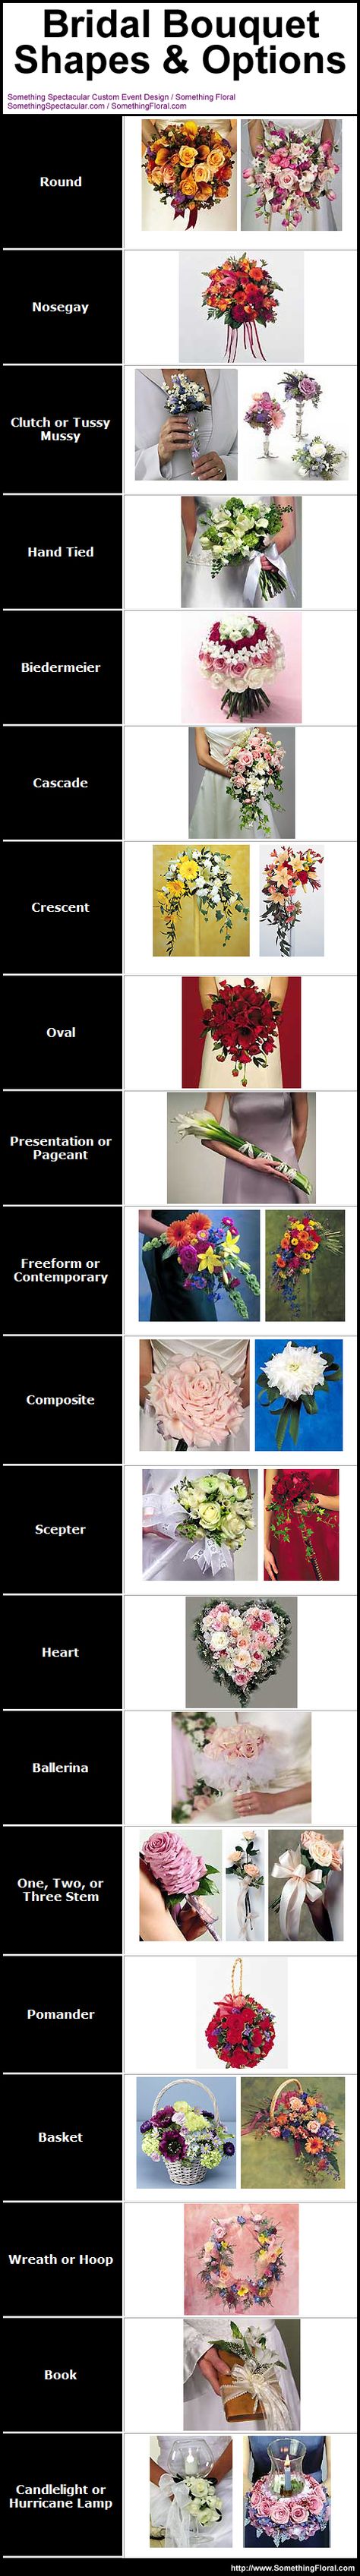 A helpful reference for brides. A pictorial list of bridal bouquet and bridesmaid bouquet shapes and options. #wedding #flowers #bouquets #shapes #types Floral Arrangements, Floral Wedding, Bouquets, Floral, Flowers Bouquet, Flower Bouquet Wedding, Beautiful Bouquet, Bouquet, Flower Arrangements